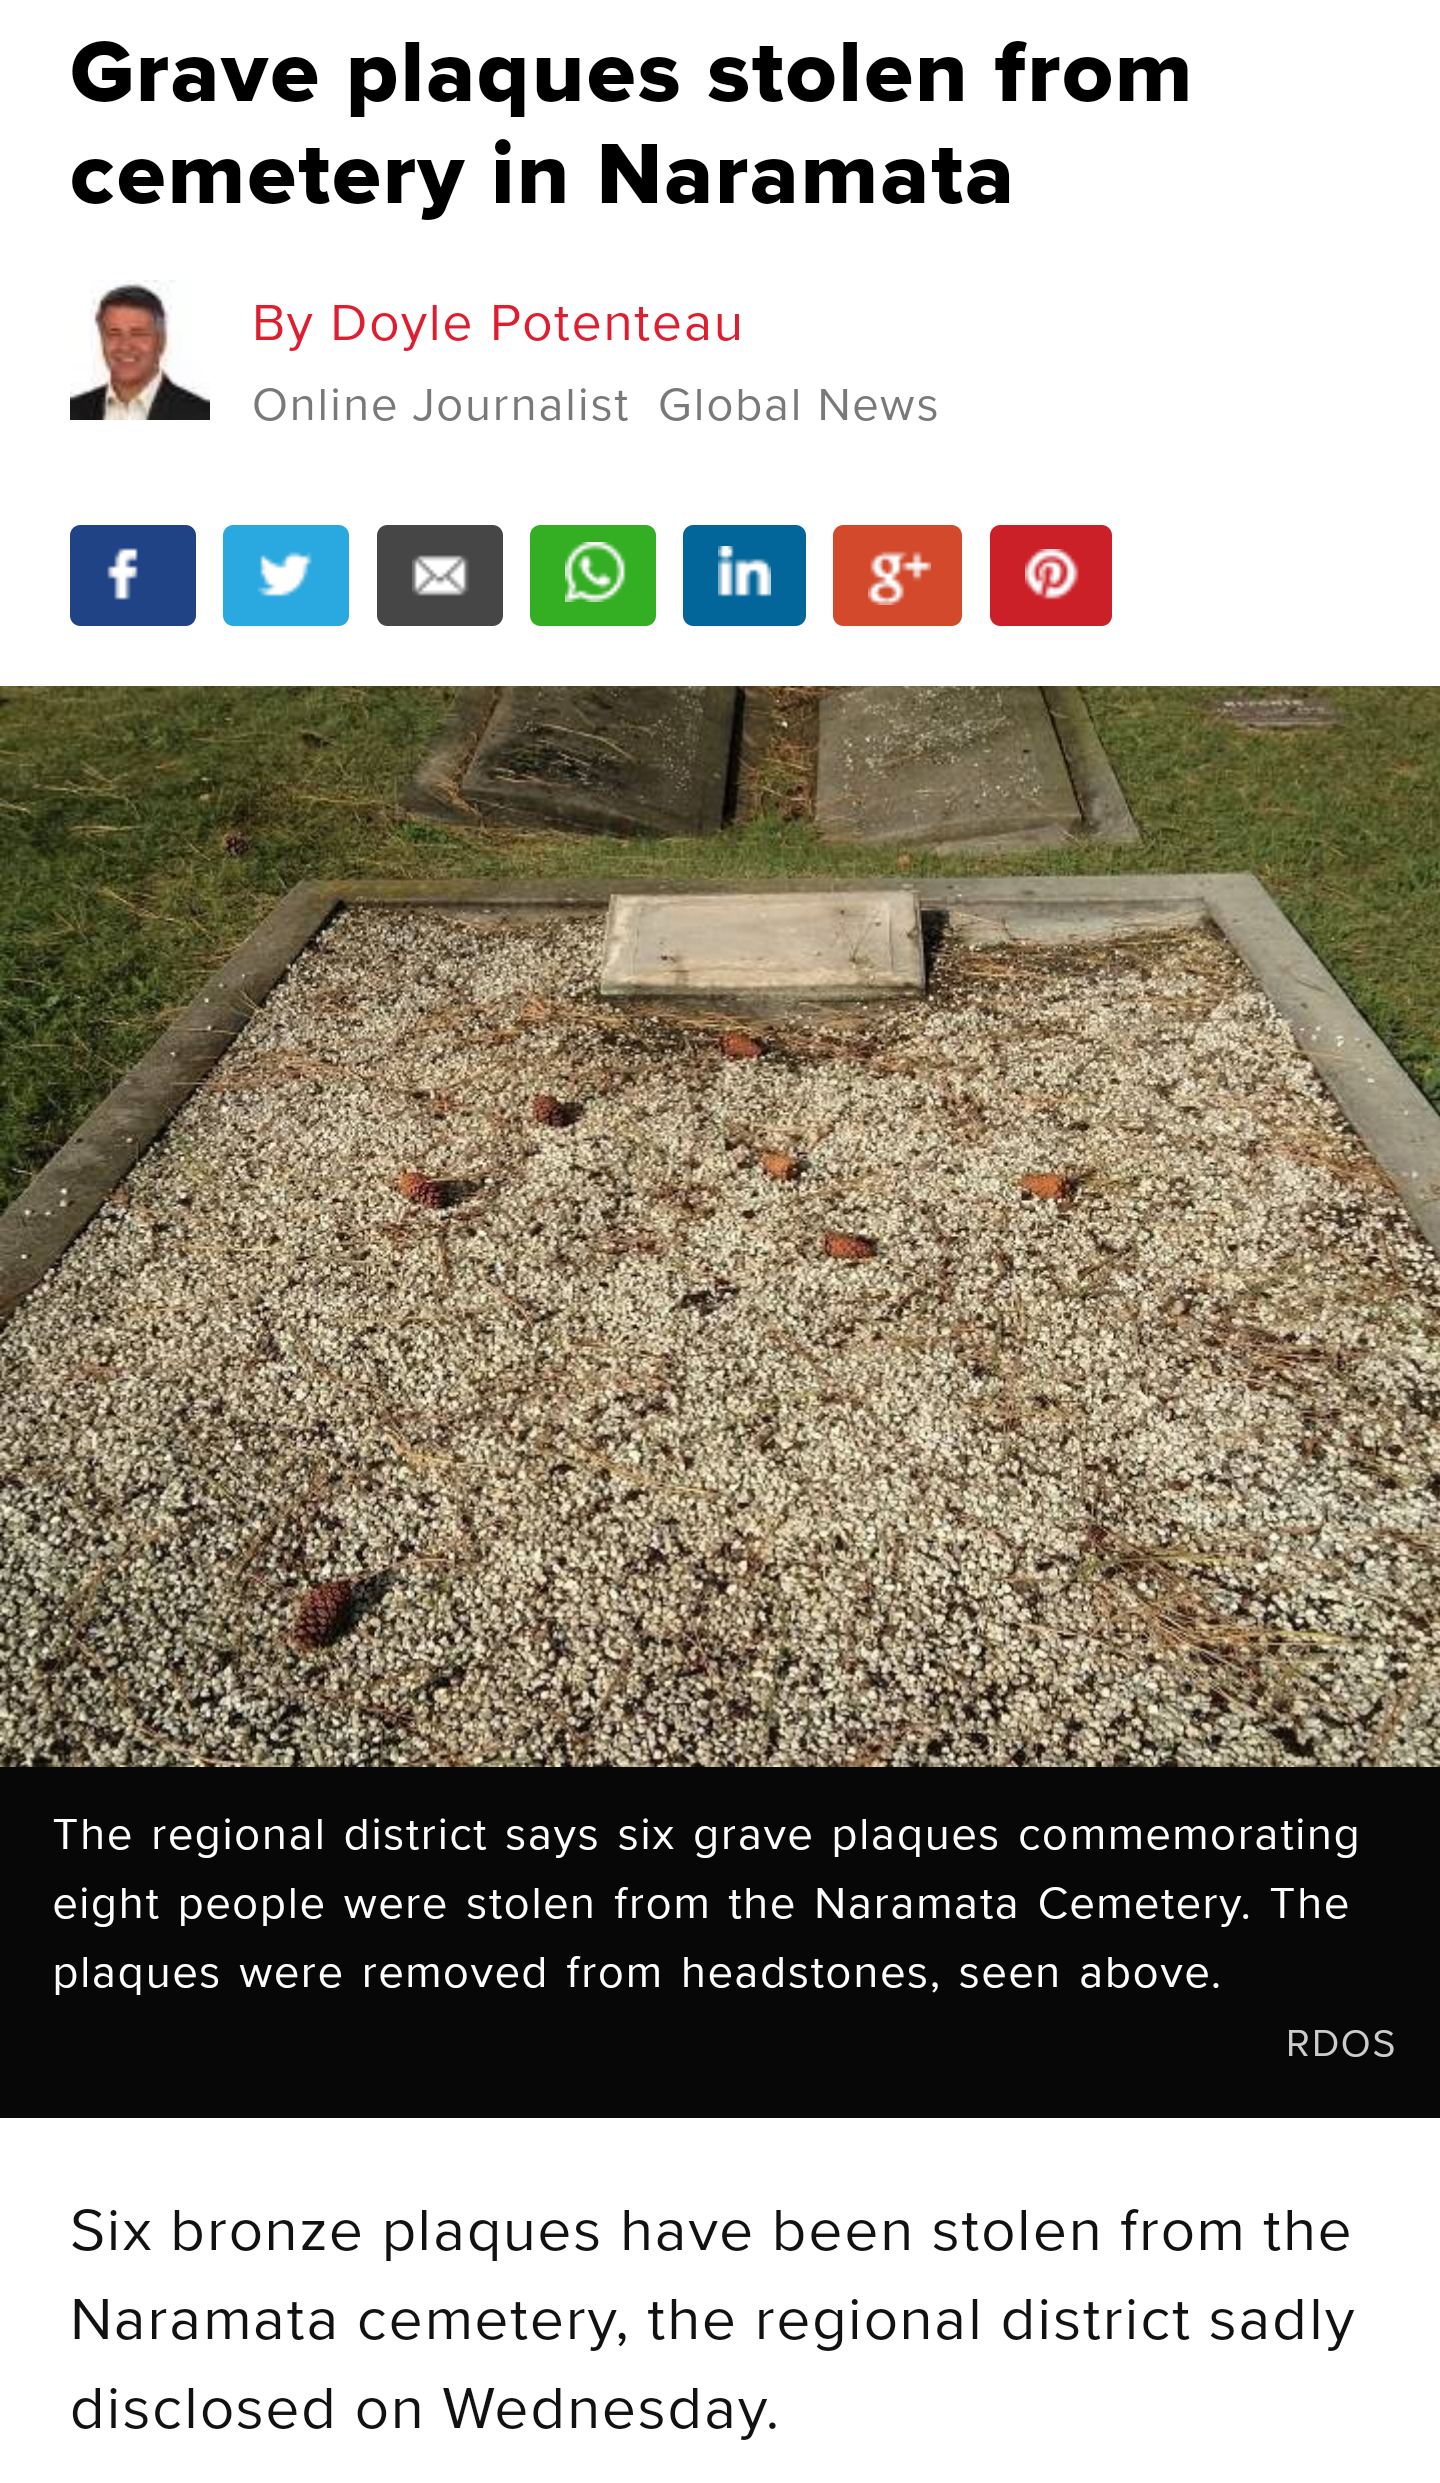 soil - Grave plaques stolen from cemetery in Naramata By Doyle Potenteau Online Journalist Global News The regional district says six grave plaques commemorating eight people were stolen from the Naramata Cemetery. The plaques were removed from headstones